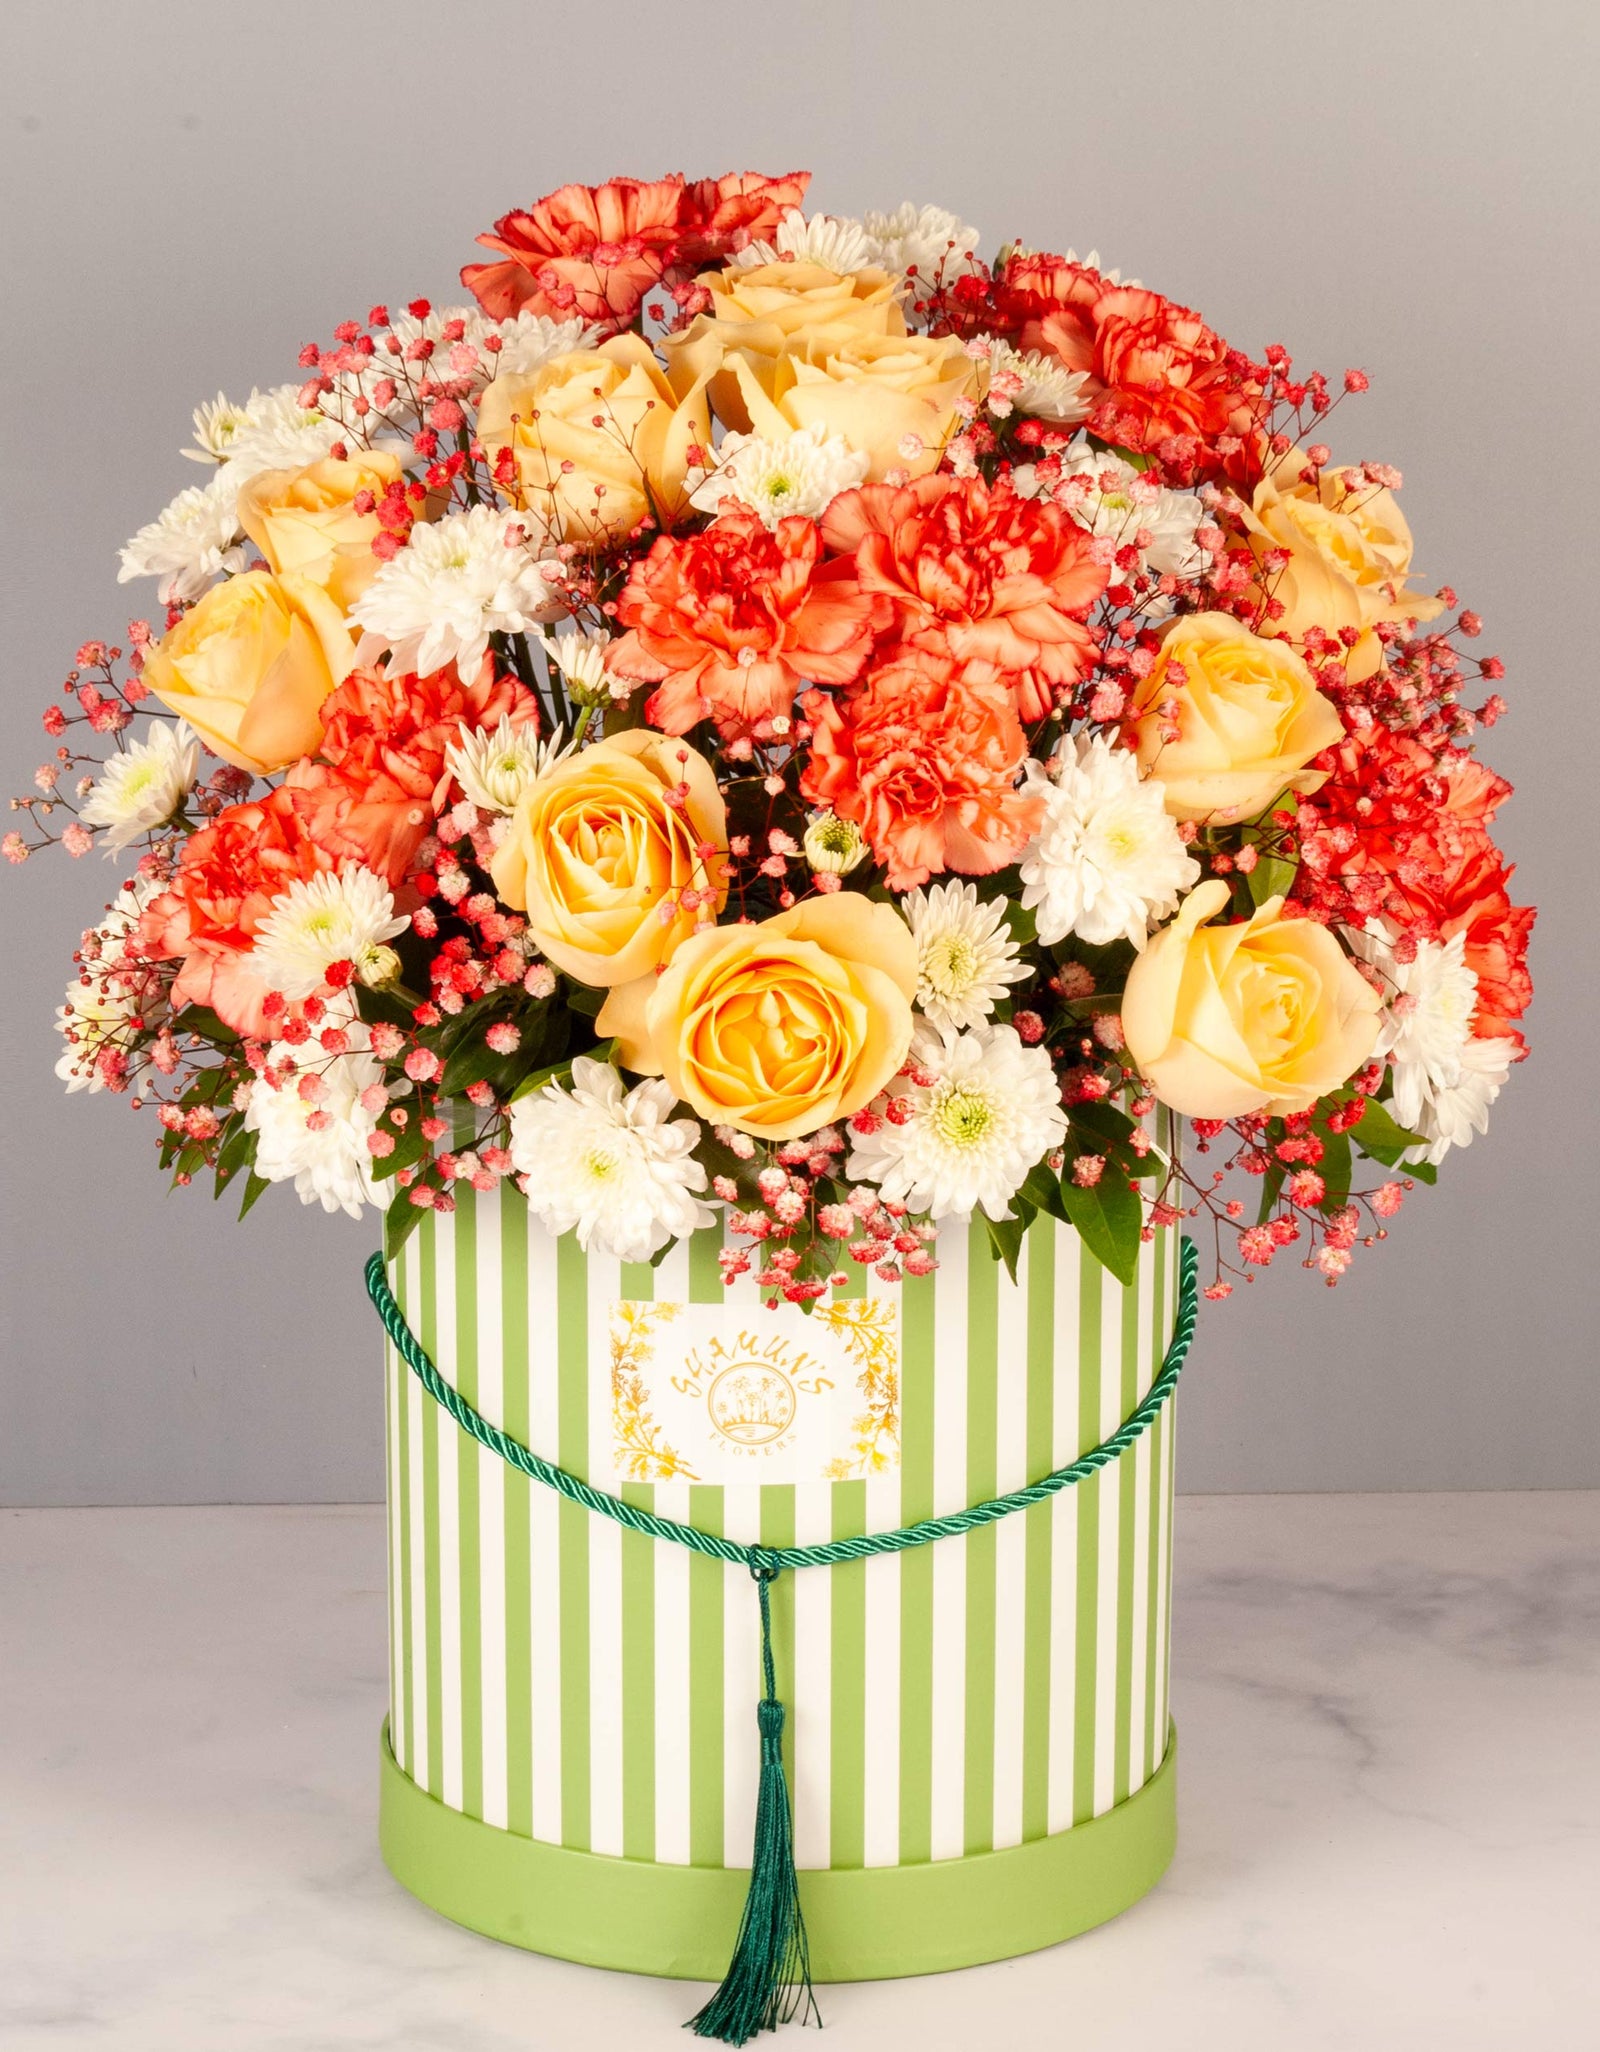 flower delivery to pune - flowers of bright colors arranged in a striped box